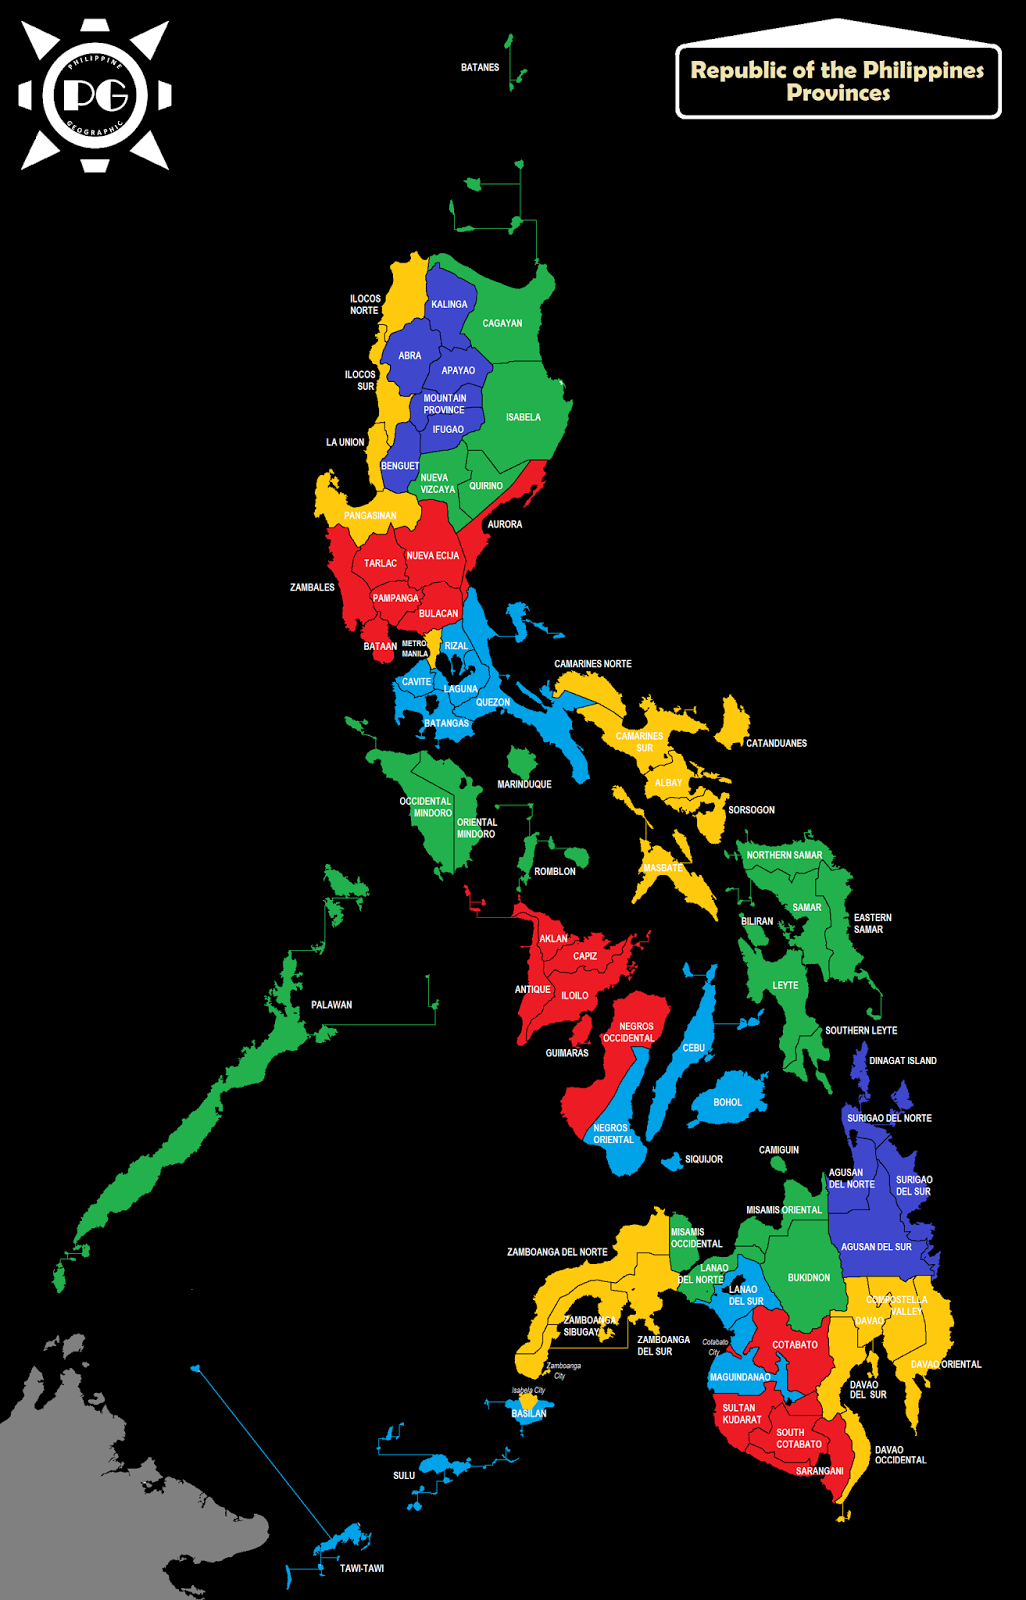 Philippine Map Philippine Province Regions Of The Philippines | Images ...